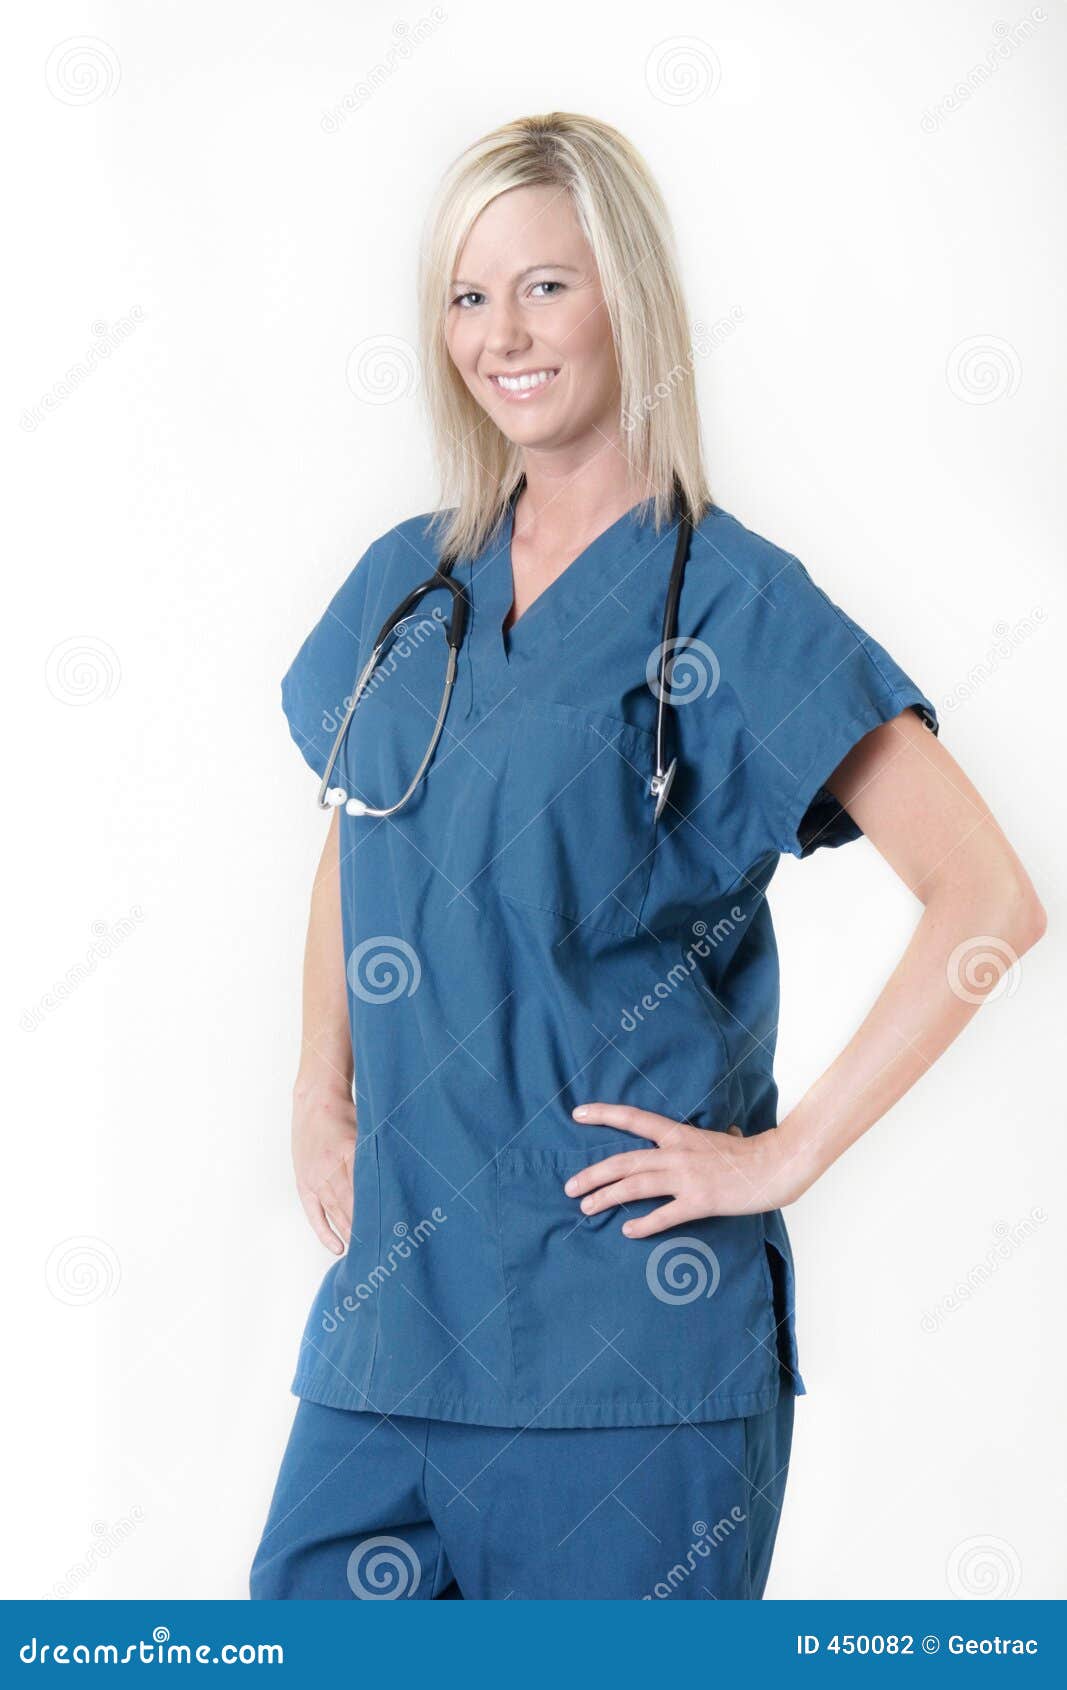 Pretty Nurse With Friendly Expression Stock Photography - Image: 450082